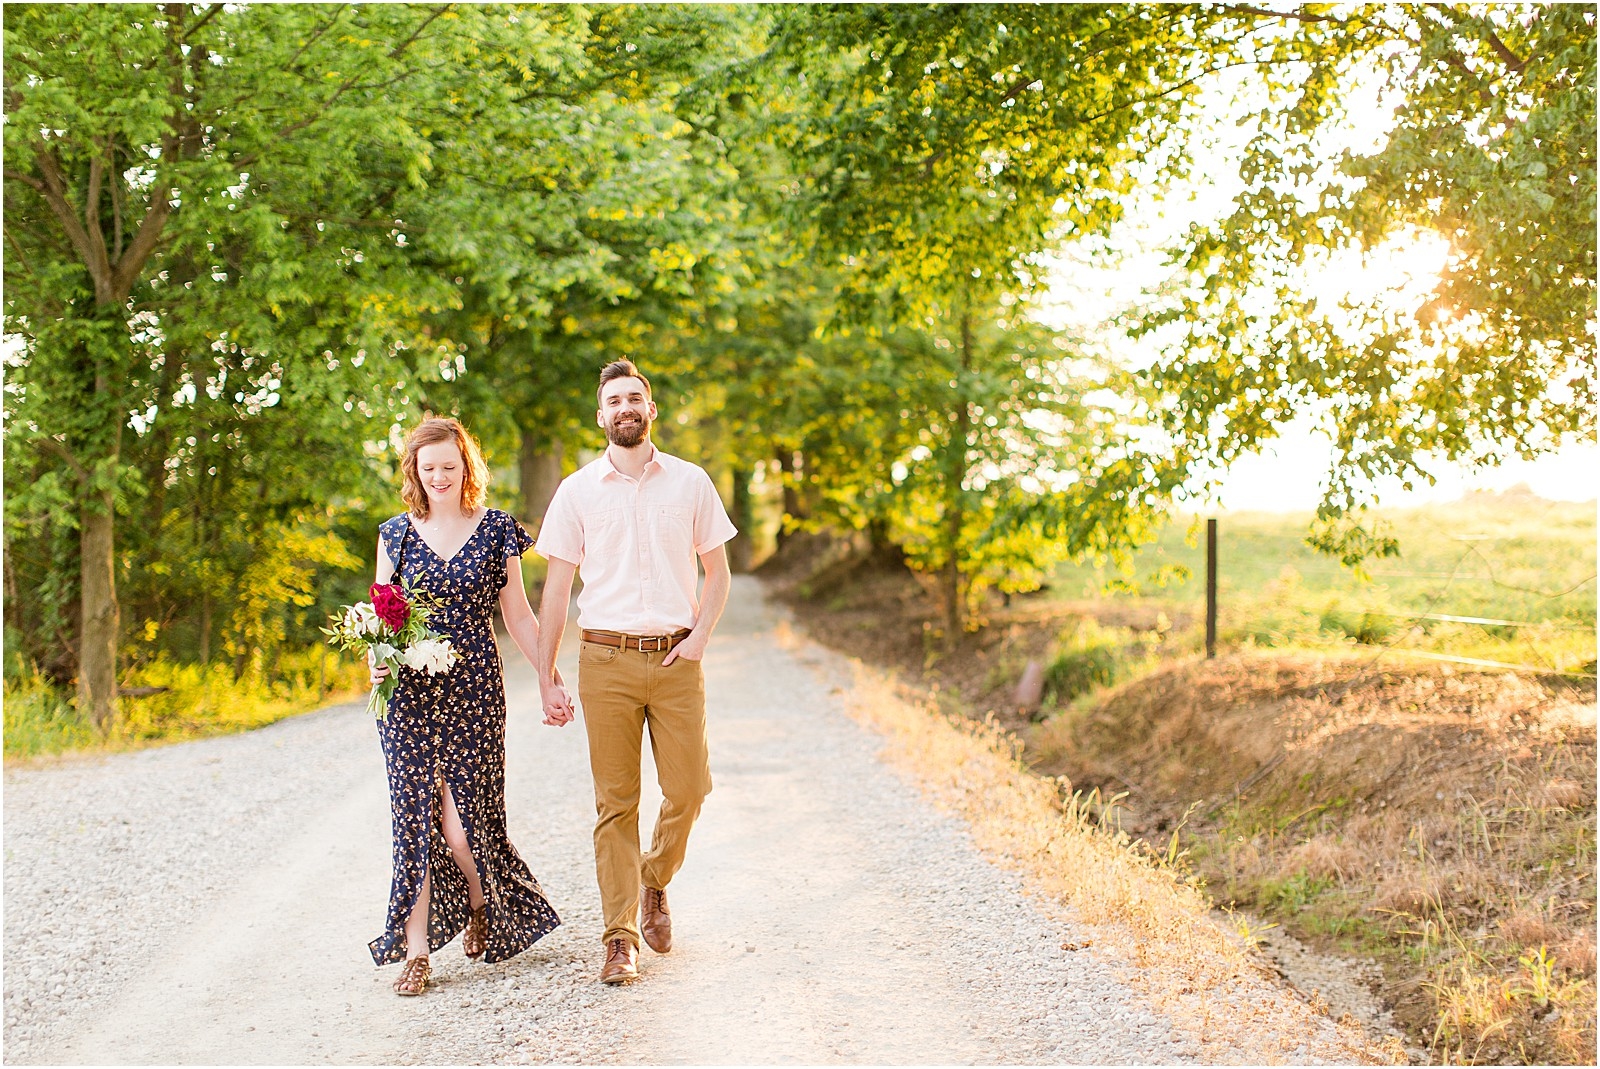 Amy and Logan | The Corner House Bed and Breakfast | Engagement Session022.jpg